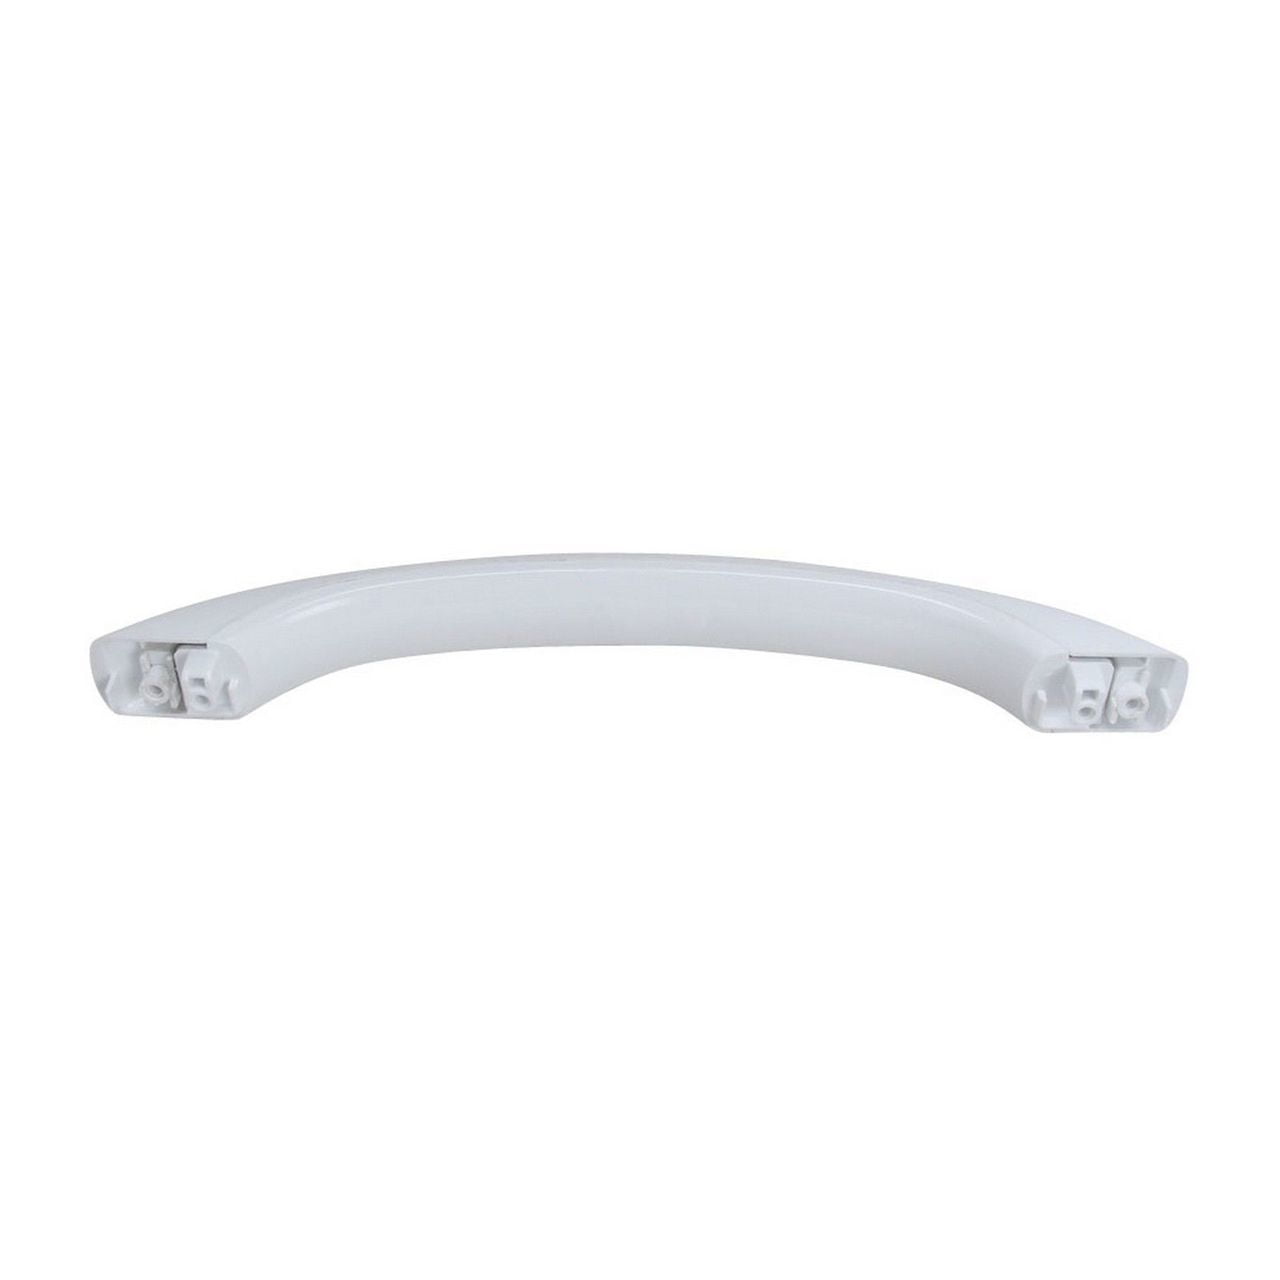 PS232252 AP2021140 Microwave Door Handle White for General Electric WB15X322